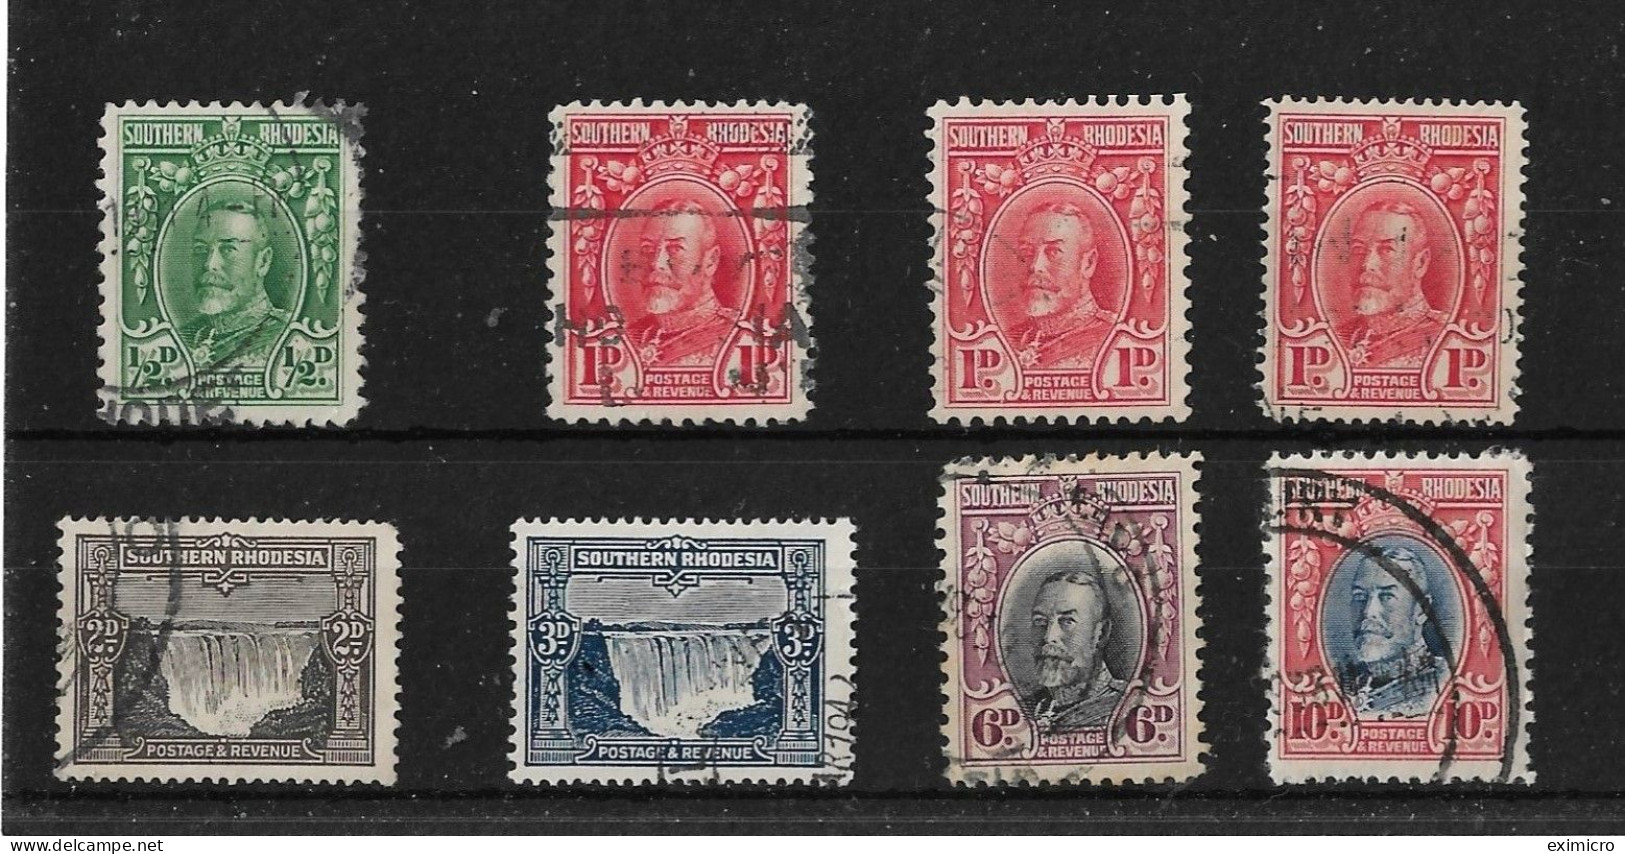 SOUTHERN RHODESIA 1931 - 1937 VALUES TO 10d SG 15,16,16a,16b,17,18,20,22 FINE USED Cat £25+ - Rhodésie Du Sud (...-1964)